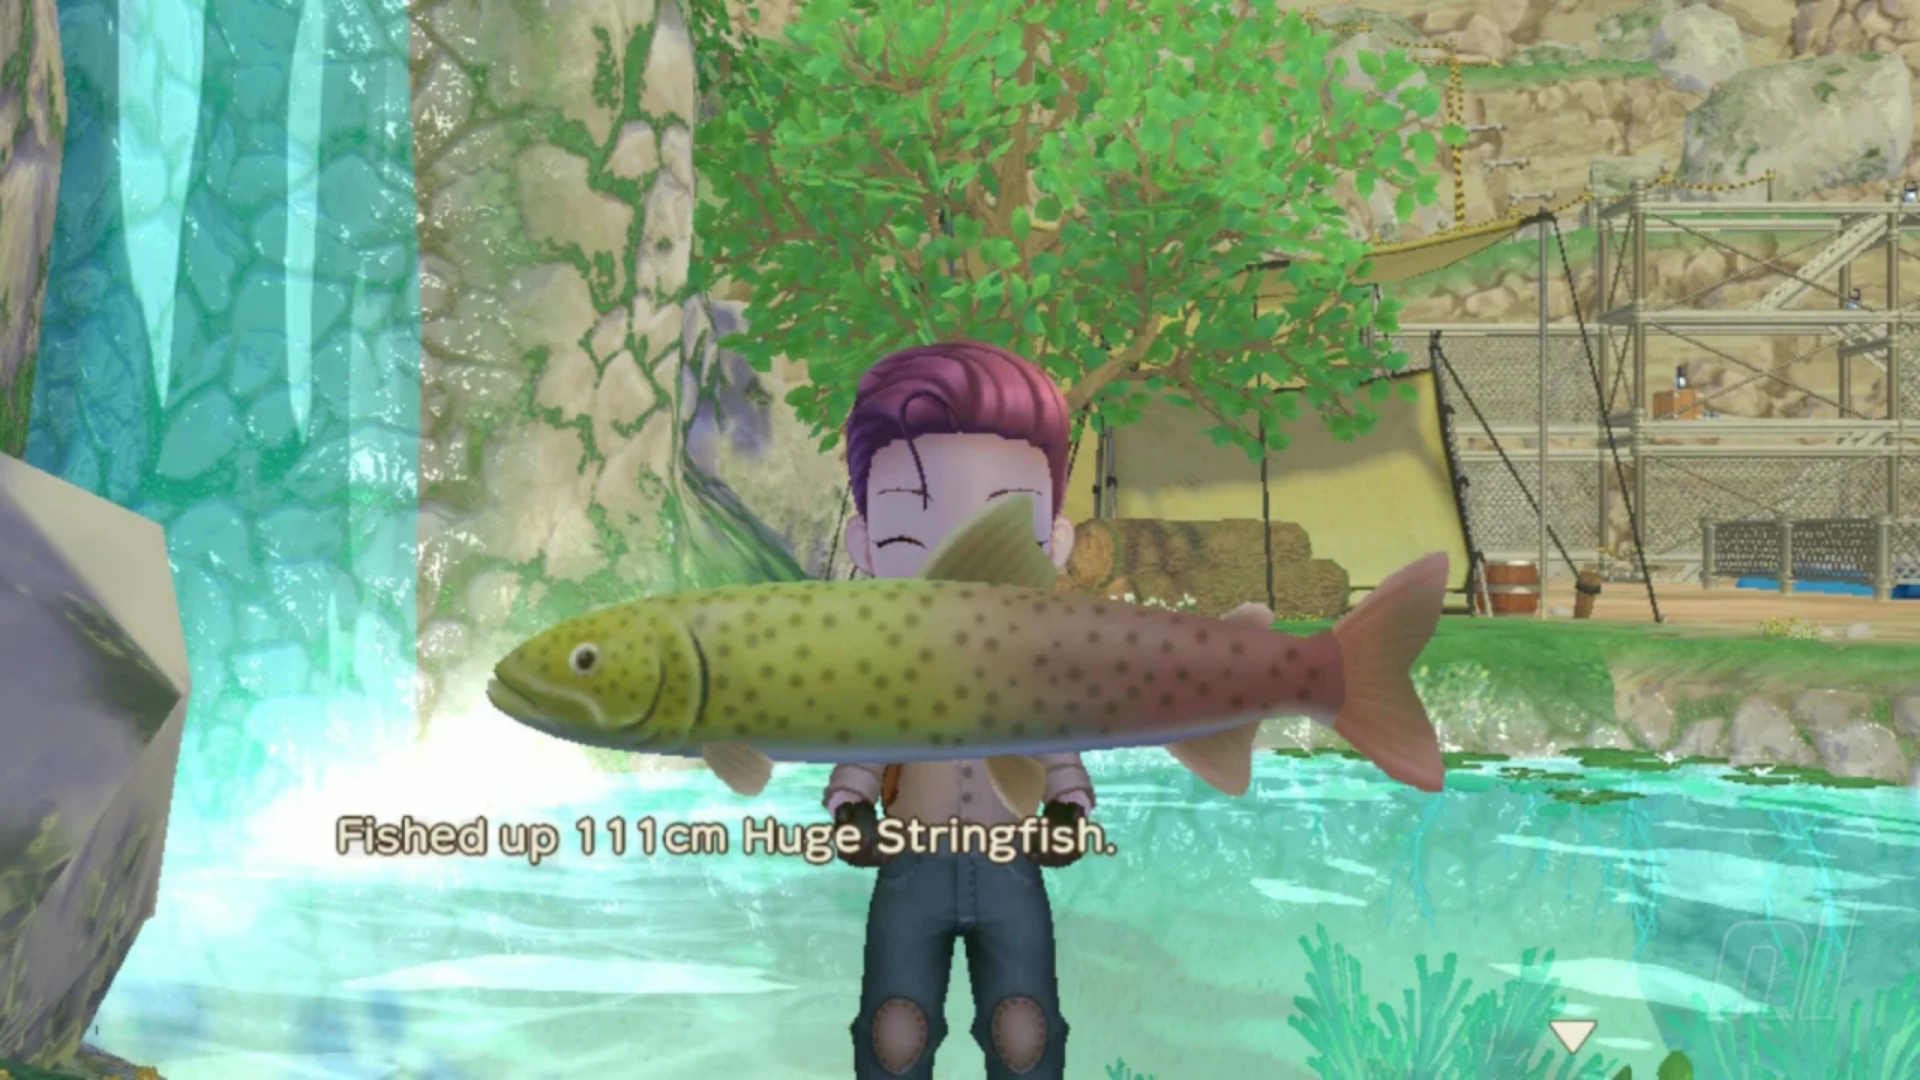 A player fishing up a Stringfish in Story of Seasons.